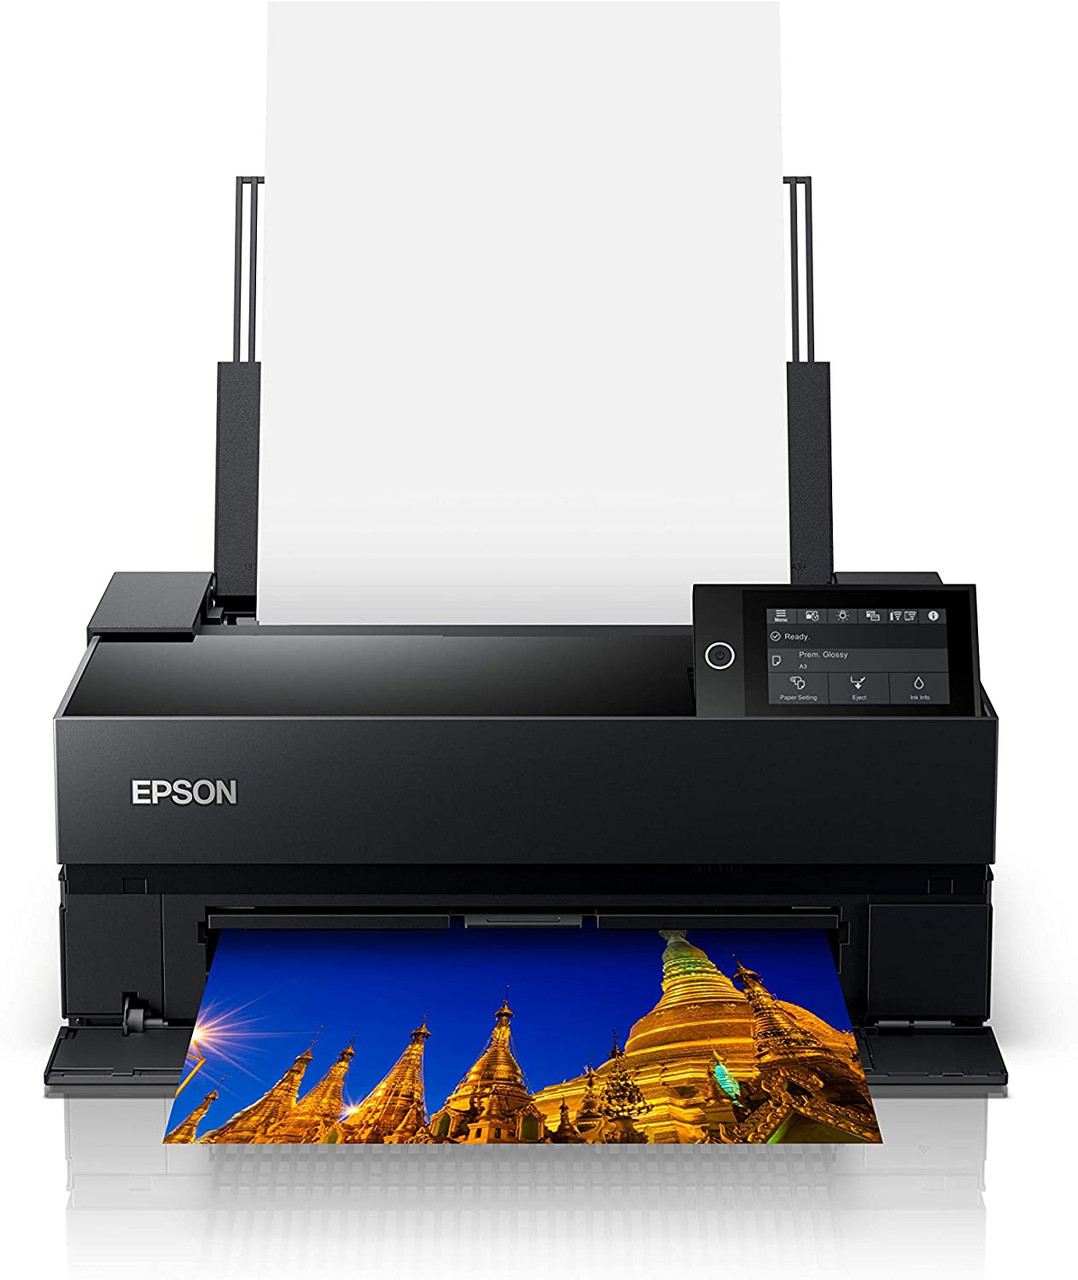 Epson SureColor P700 Lease for as low as $18.24 Per Mo